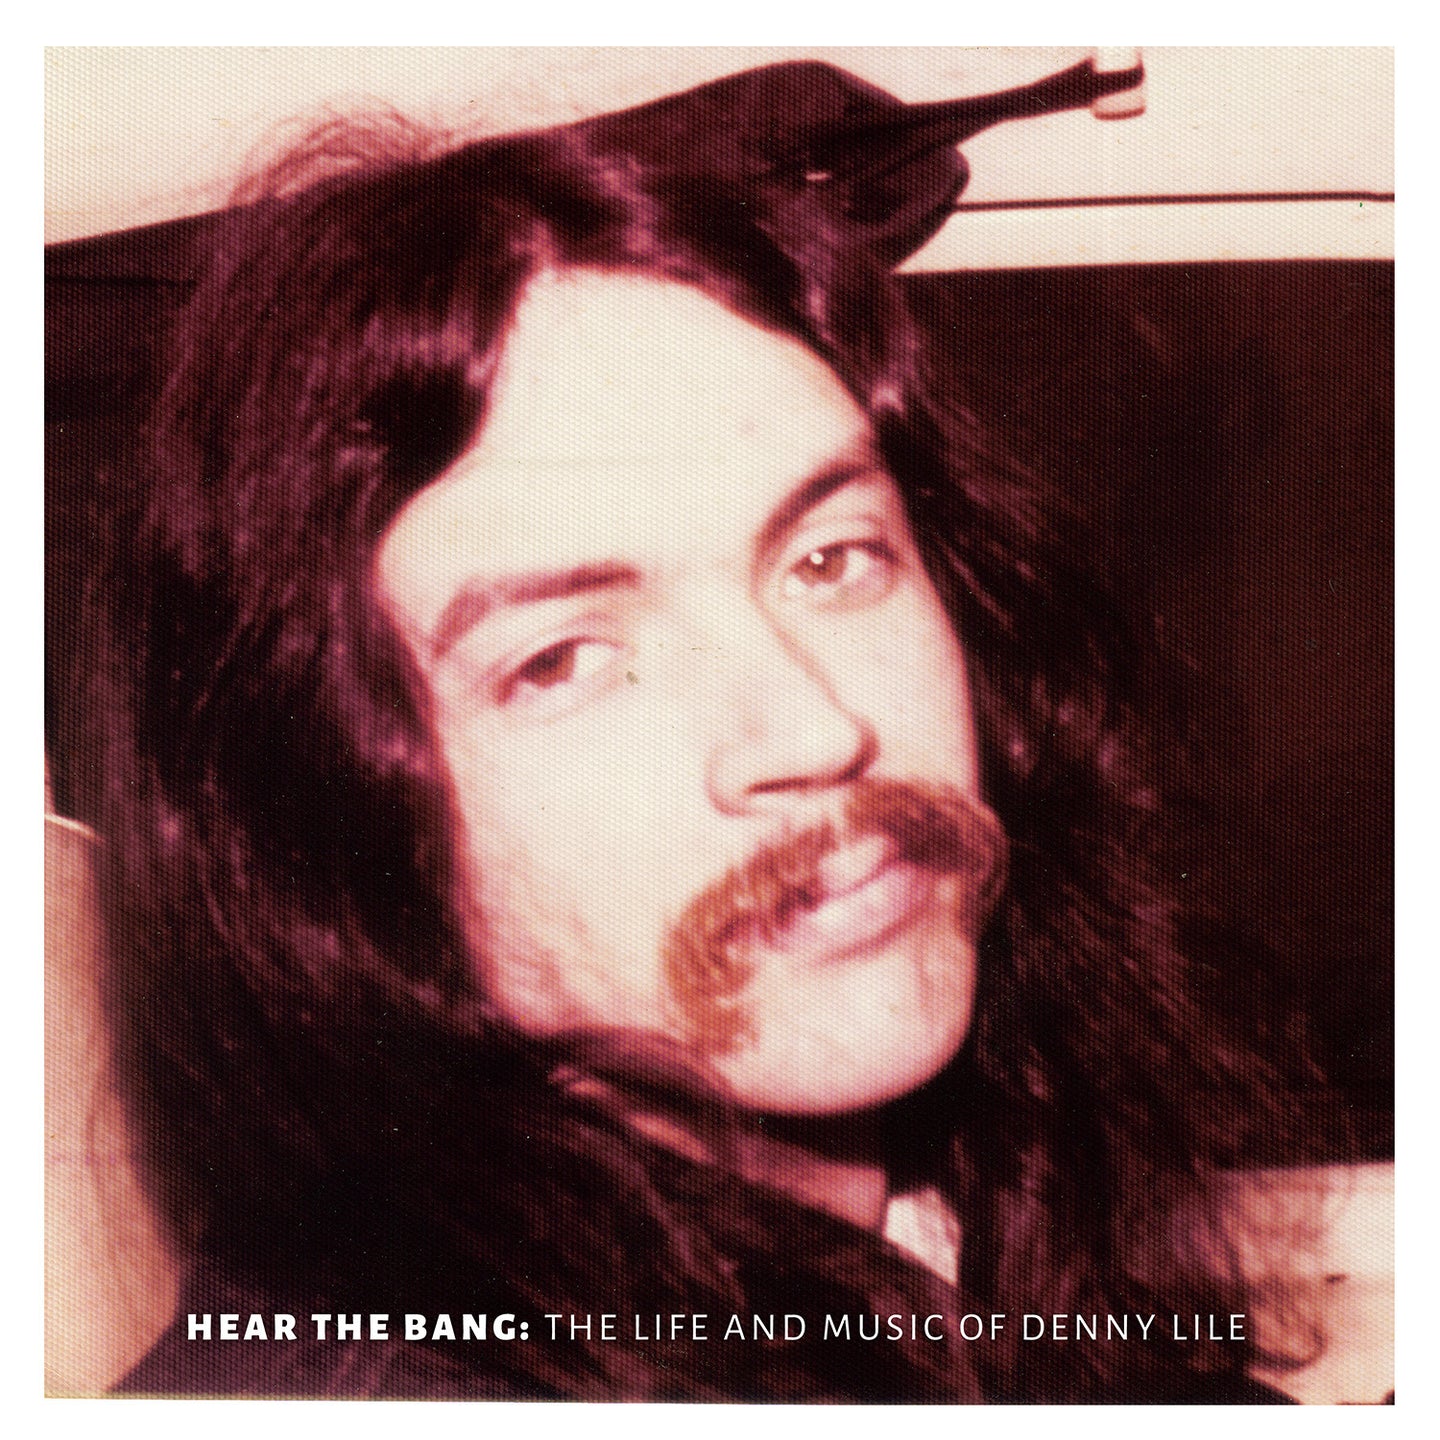 Hear the Bang: The Life and Music of Denny Lile